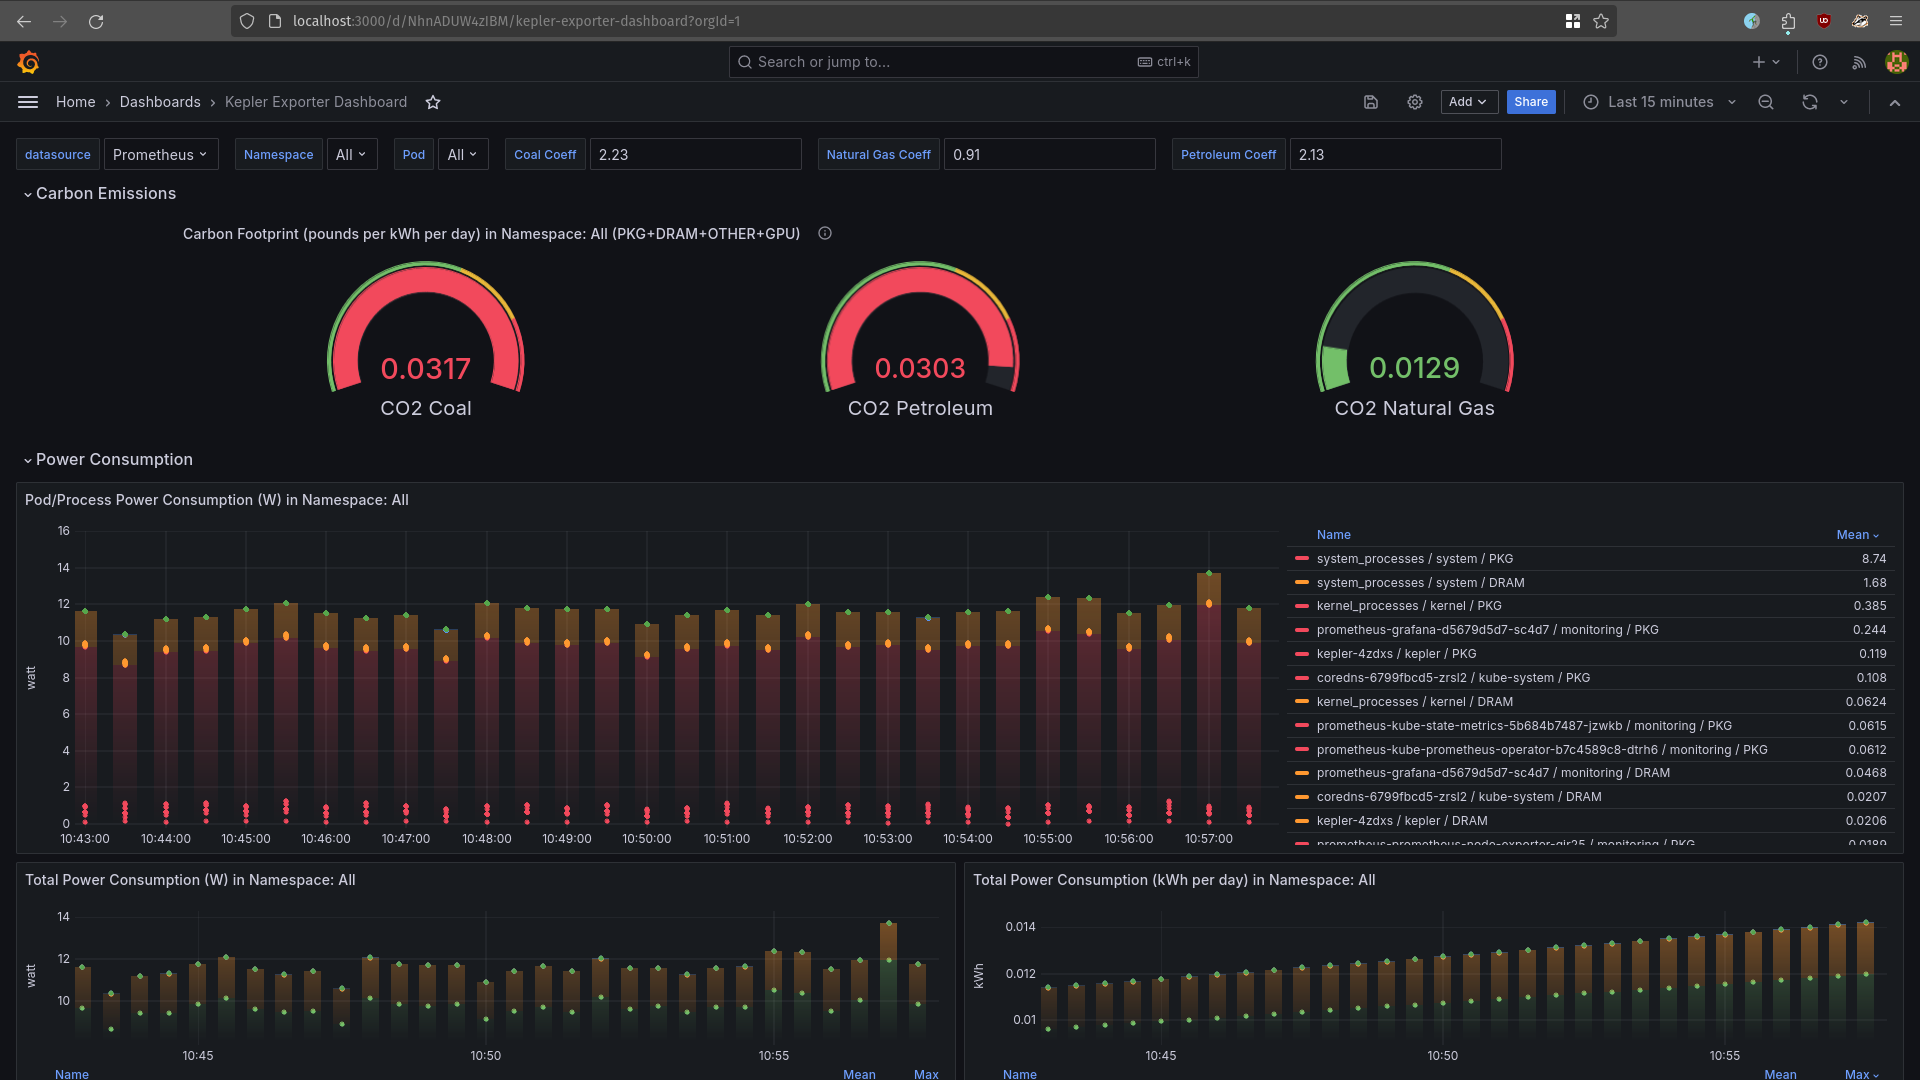 Grafana dashboard for Kepler Exporter displaying multiple panels. The top section shows three gauge panels for ‘CO2 Coal’, ‘CO2 Petroleum’, and ‘CO2 Natural Gas’, indicating real-time carbon dioxide emissions. Below is a bar graph titled ‘Power Consumption in KW over 24h per Source’, showing power consumption data over a 24-hour period segmented by different energy sources. The bottom section contains two horizontal bar graphs titled ‘Total Power Consumption in KW: Non-Renewable’ and ‘Total Power Consumption in KW: Renewable A-K’, displaying cumulative power consumption data categorized into non-renewable and renewable energy sources respectively.